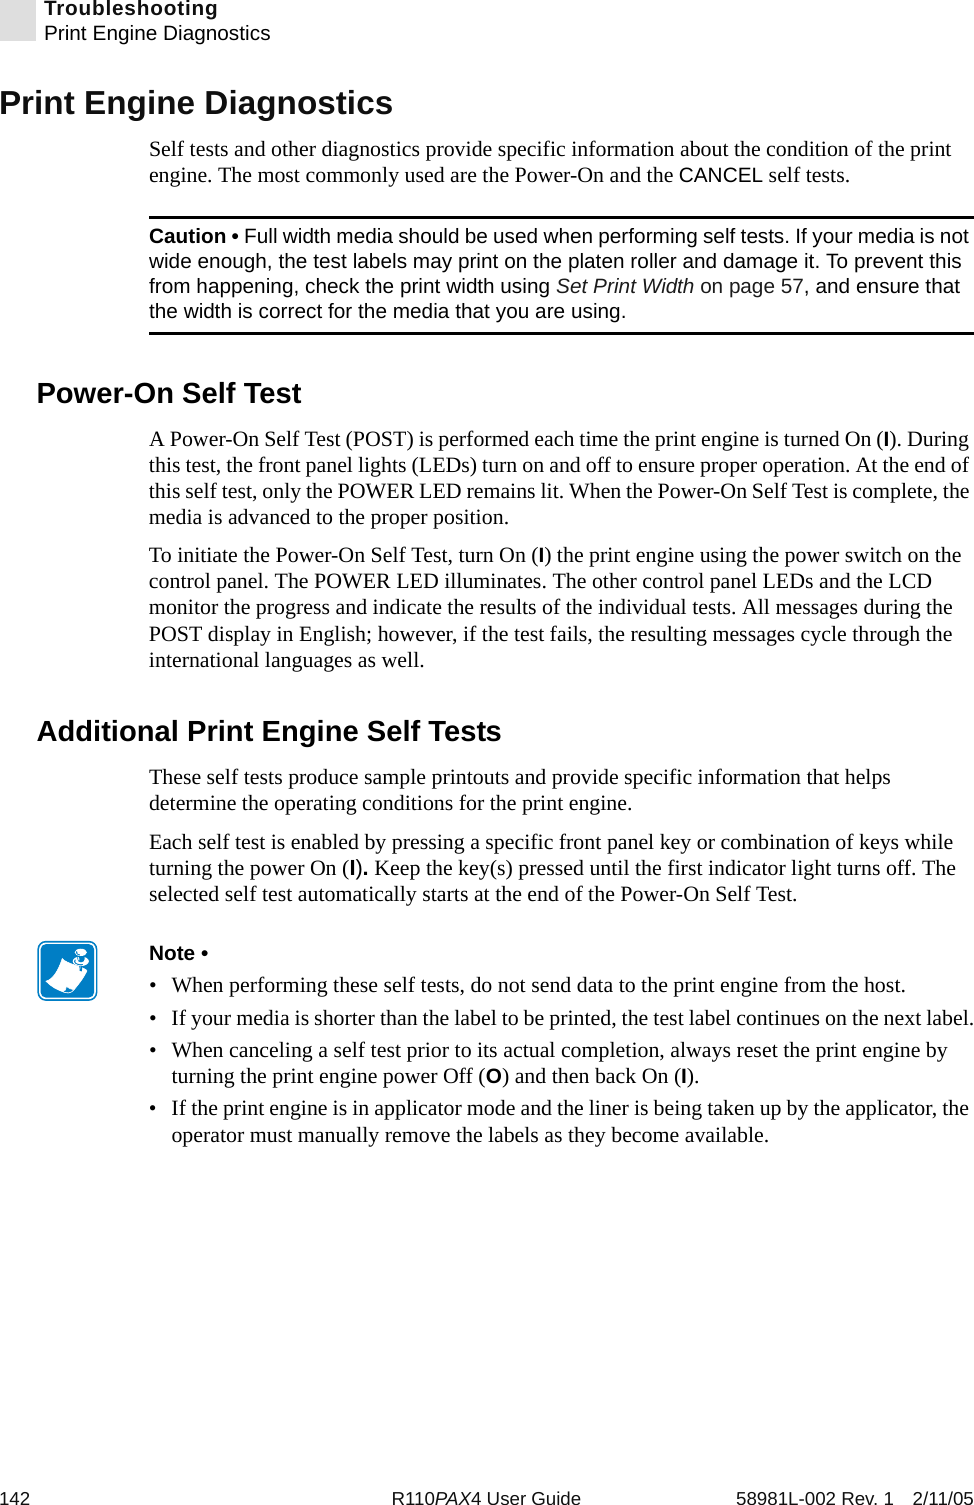 142 R110PAX4 User Guide 58981L-002 Rev. 1 2/11/05TroubleshootingPrint Engine DiagnosticsPrint Engine DiagnosticsSelf tests and other diagnostics provide specific information about the condition of the print engine. The most commonly used are the Power-On and the CANCEL self tests.Power-On Self TestA Power-On Self Test (POST) is performed each time the print engine is turned On (I). During this test, the front panel lights (LEDs) turn on and off to ensure proper operation. At the end of this self test, only the POWER LED remains lit. When the Power-On Self Test is complete, the media is advanced to the proper position.To initiate the Power-On Self Test, turn On (I) the print engine using the power switch on the control panel. The POWER LED illuminates. The other control panel LEDs and the LCD monitor the progress and indicate the results of the individual tests. All messages during the POST display in English; however, if the test fails, the resulting messages cycle through the international languages as well.Additional Print Engine Self TestsThese self tests produce sample printouts and provide specific information that helps determine the operating conditions for the print engine.Each self test is enabled by pressing a specific front panel key or combination of keys while turning the power On (I). Keep the key(s) pressed until the first indicator light turns off. The selected self test automatically starts at the end of the Power-On Self Test.Caution • Full width media should be used when performing self tests. If your media is not wide enough, the test labels may print on the platen roller and damage it. To prevent this from happening, check the print width using Set Print Width on page 57, and ensure that the width is correct for the media that you are using.Note • • When performing these self tests, do not send data to the print engine from the host.• If your media is shorter than the label to be printed, the test label continues on the next label.• When canceling a self test prior to its actual completion, always reset the print engine by turning the print engine power Off (O) and then back On (I).• If the print engine is in applicator mode and the liner is being taken up by the applicator, the operator must manually remove the labels as they become available.